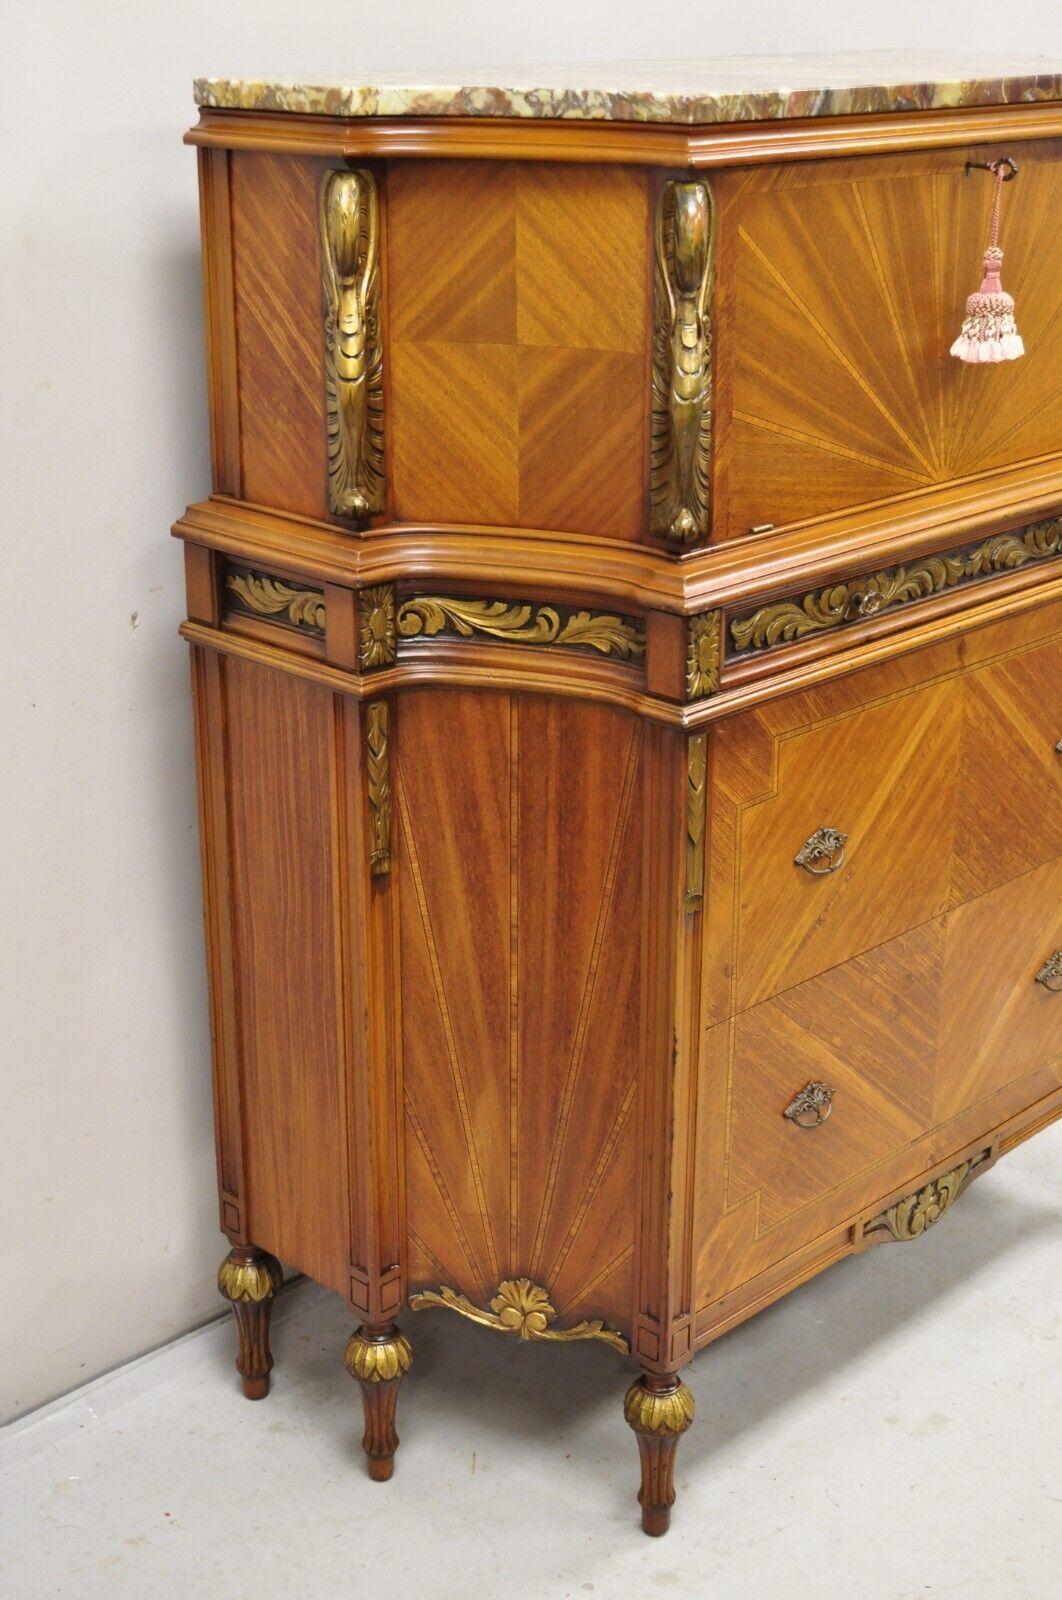 Antique French Louis XVI Style Marble Top Satinwood Tall Chest Dresser w/ Swans In Good Condition For Sale In Philadelphia, PA